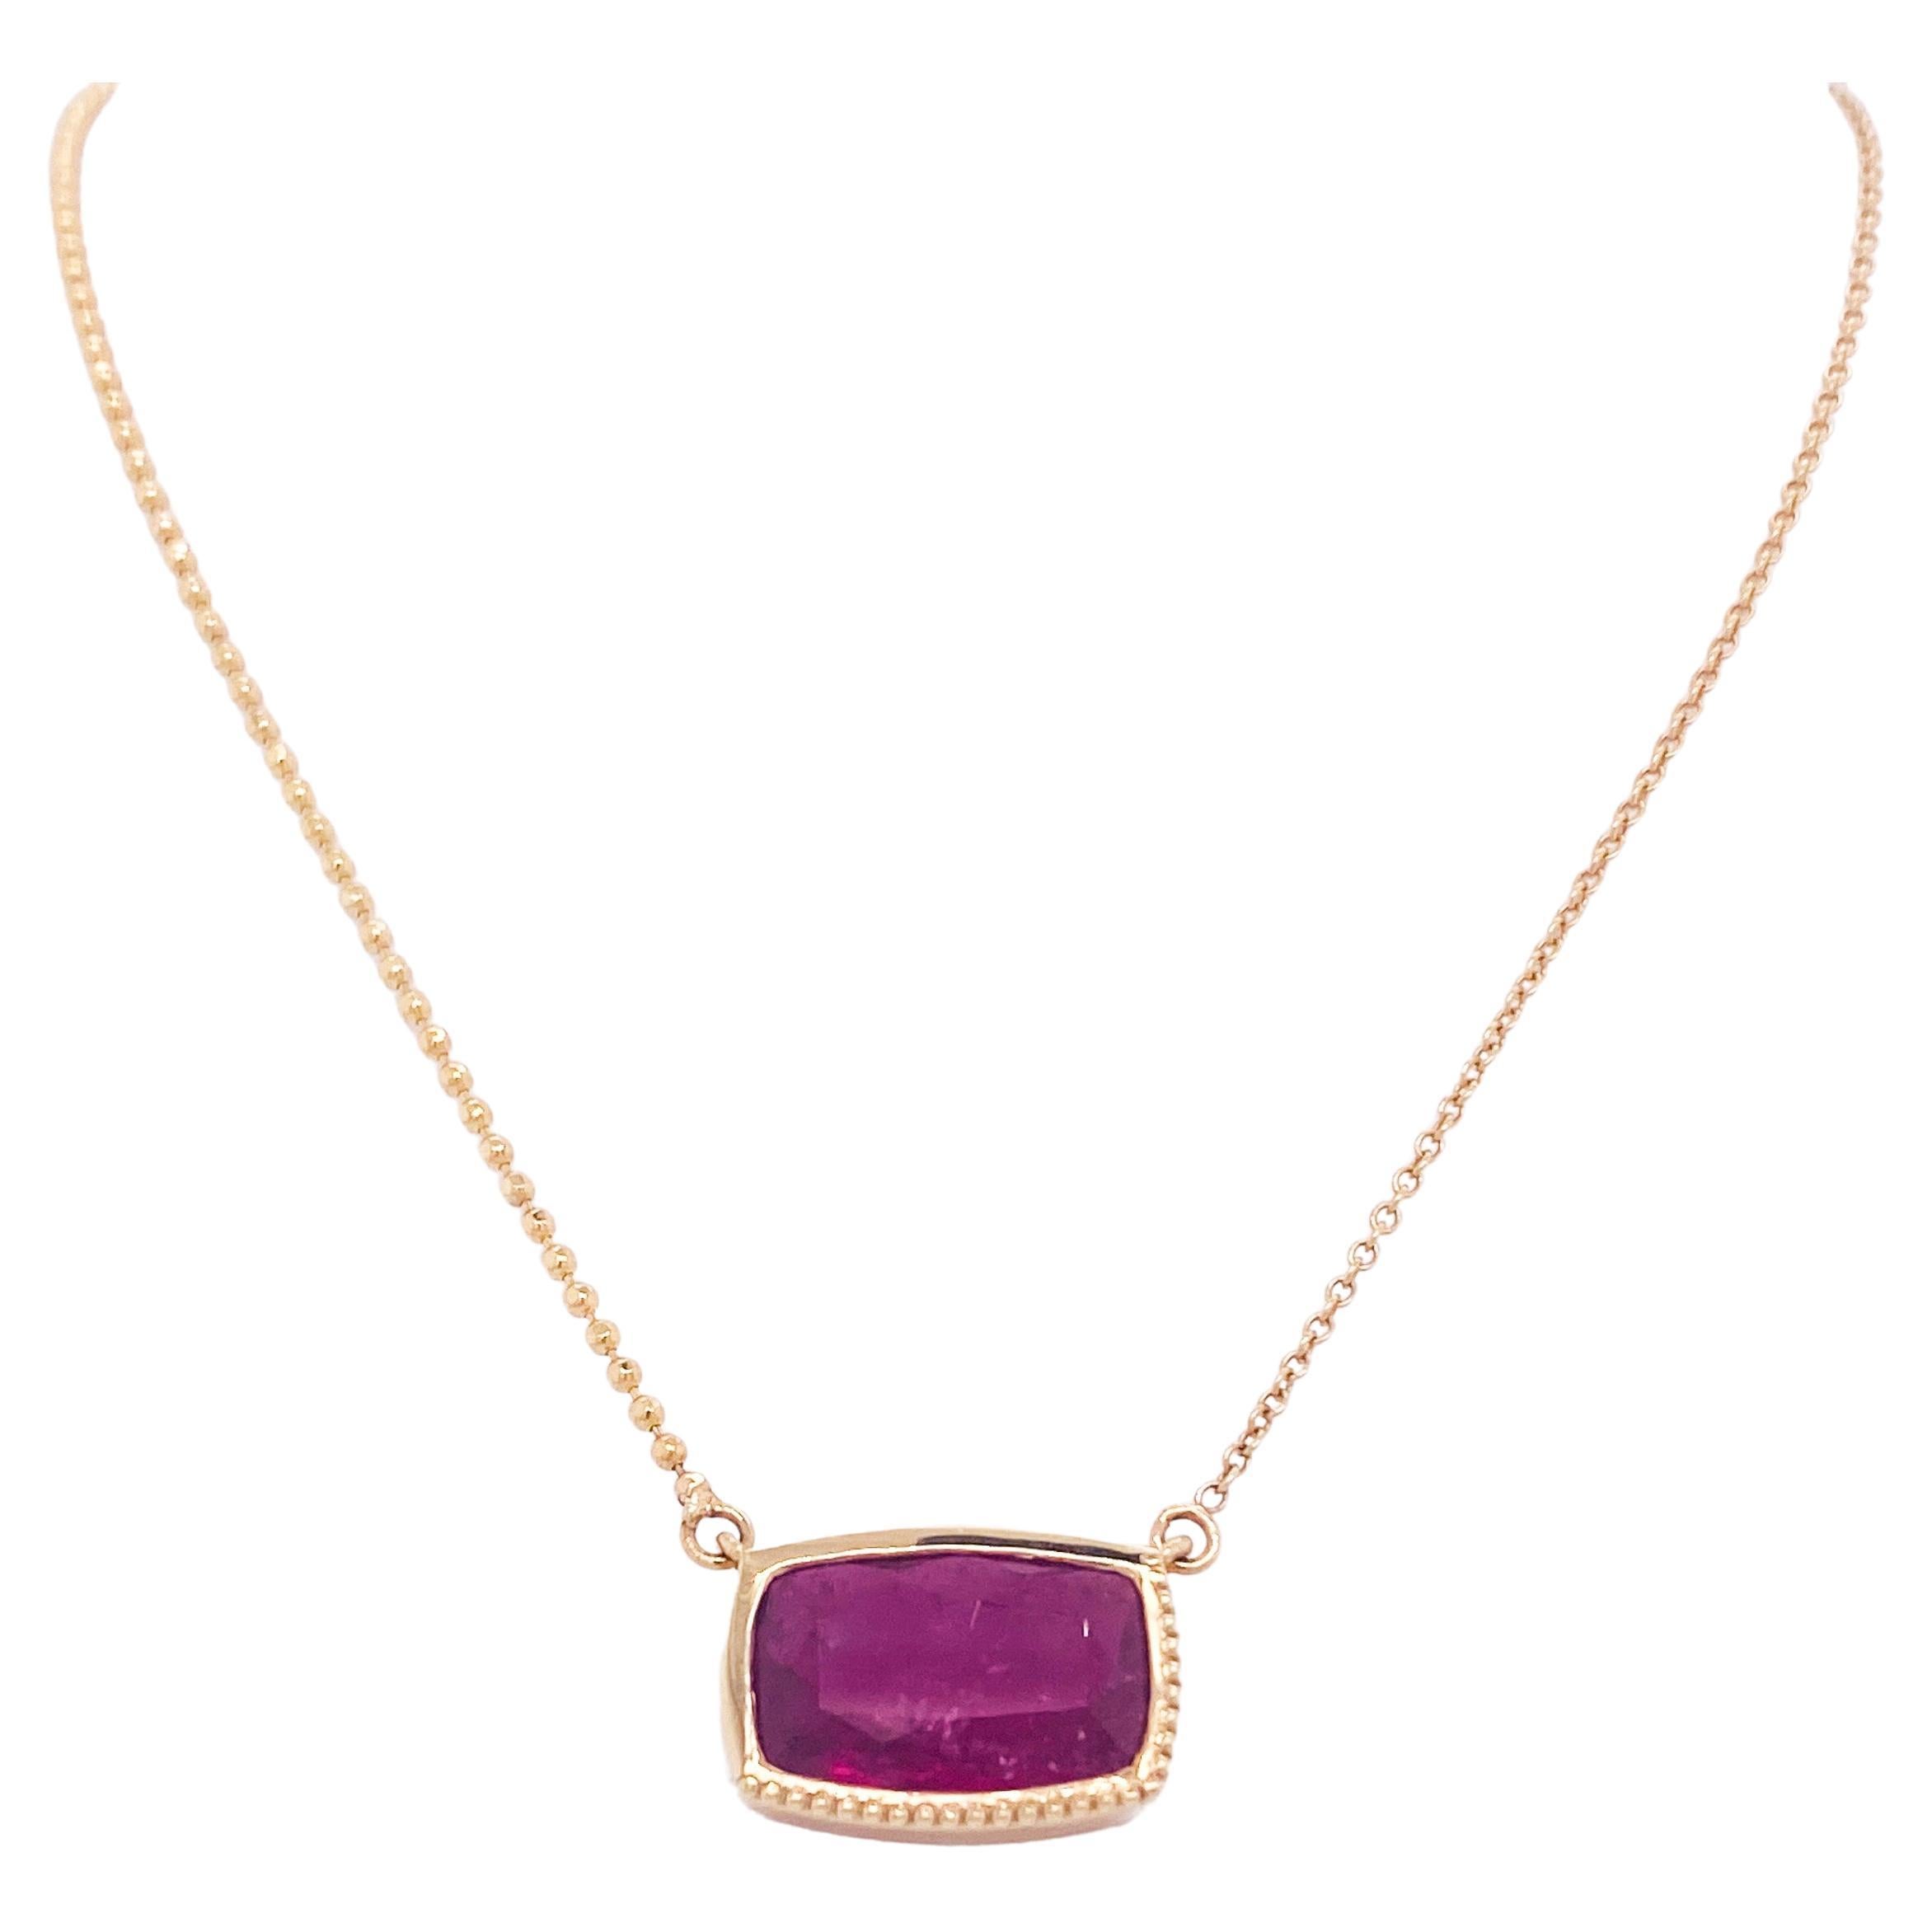 Fuchsia Pink Tourmaline Necklace with Asymmetric Details in 14K Yellow Gold LV For Sale